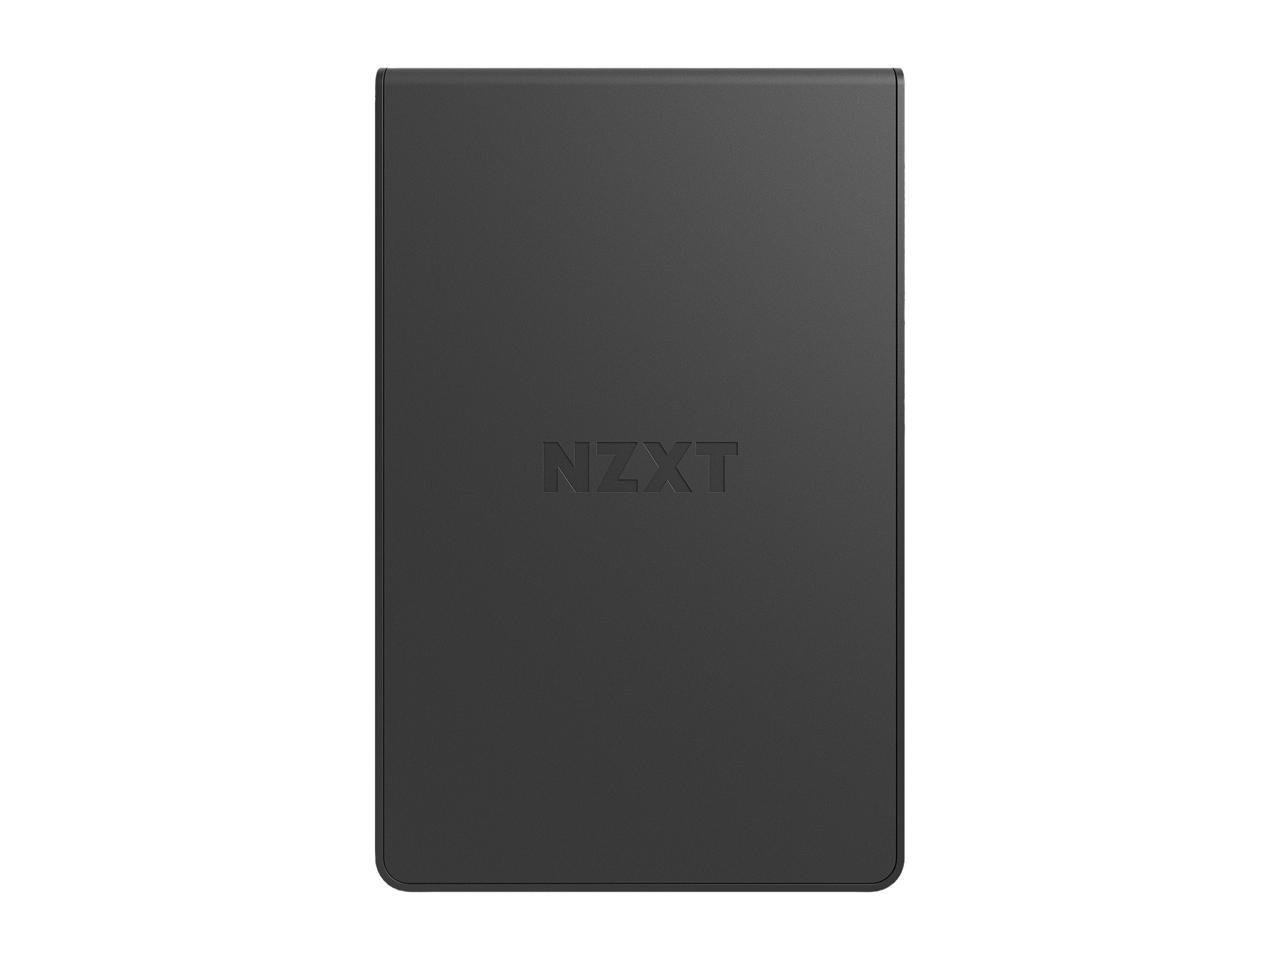 NZXT Grid+ V3 - 6-Channel Digital Fan Controller - Smart Fan Control - Adaptive Noise Reduction - Slim Profile and Magnetic Back